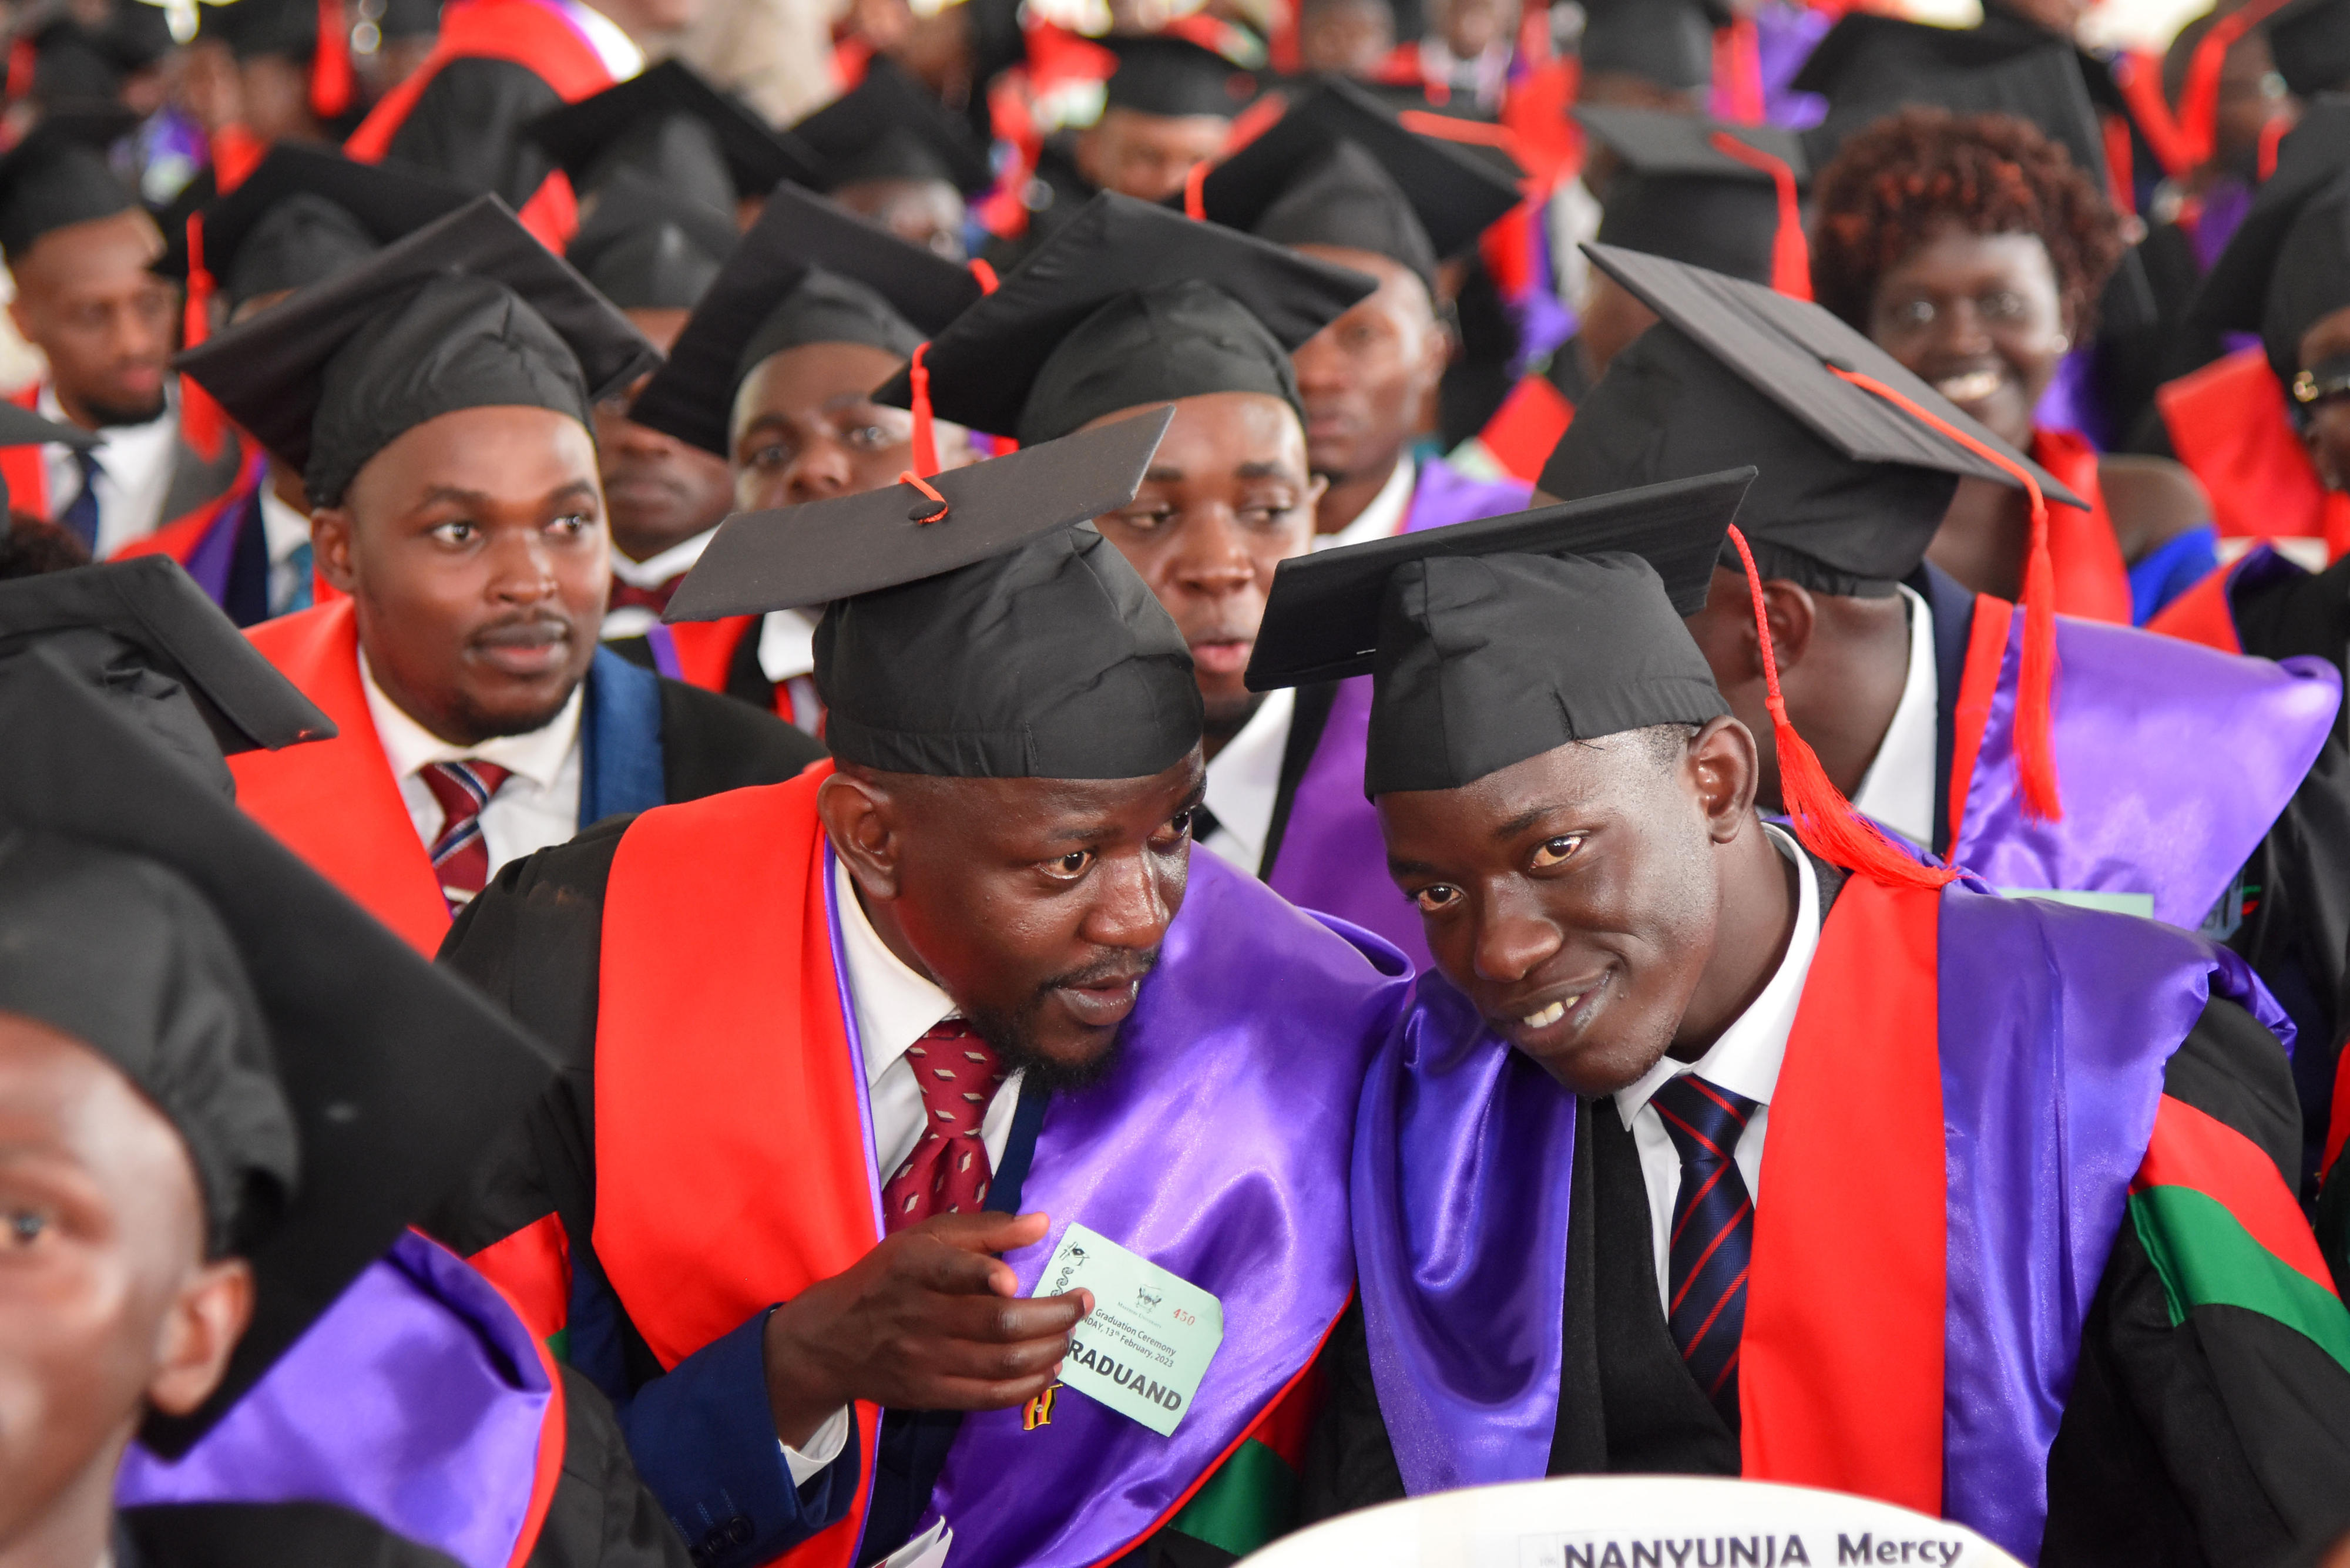 'Expired' courses debacle a sign of bigger problems - Monitor